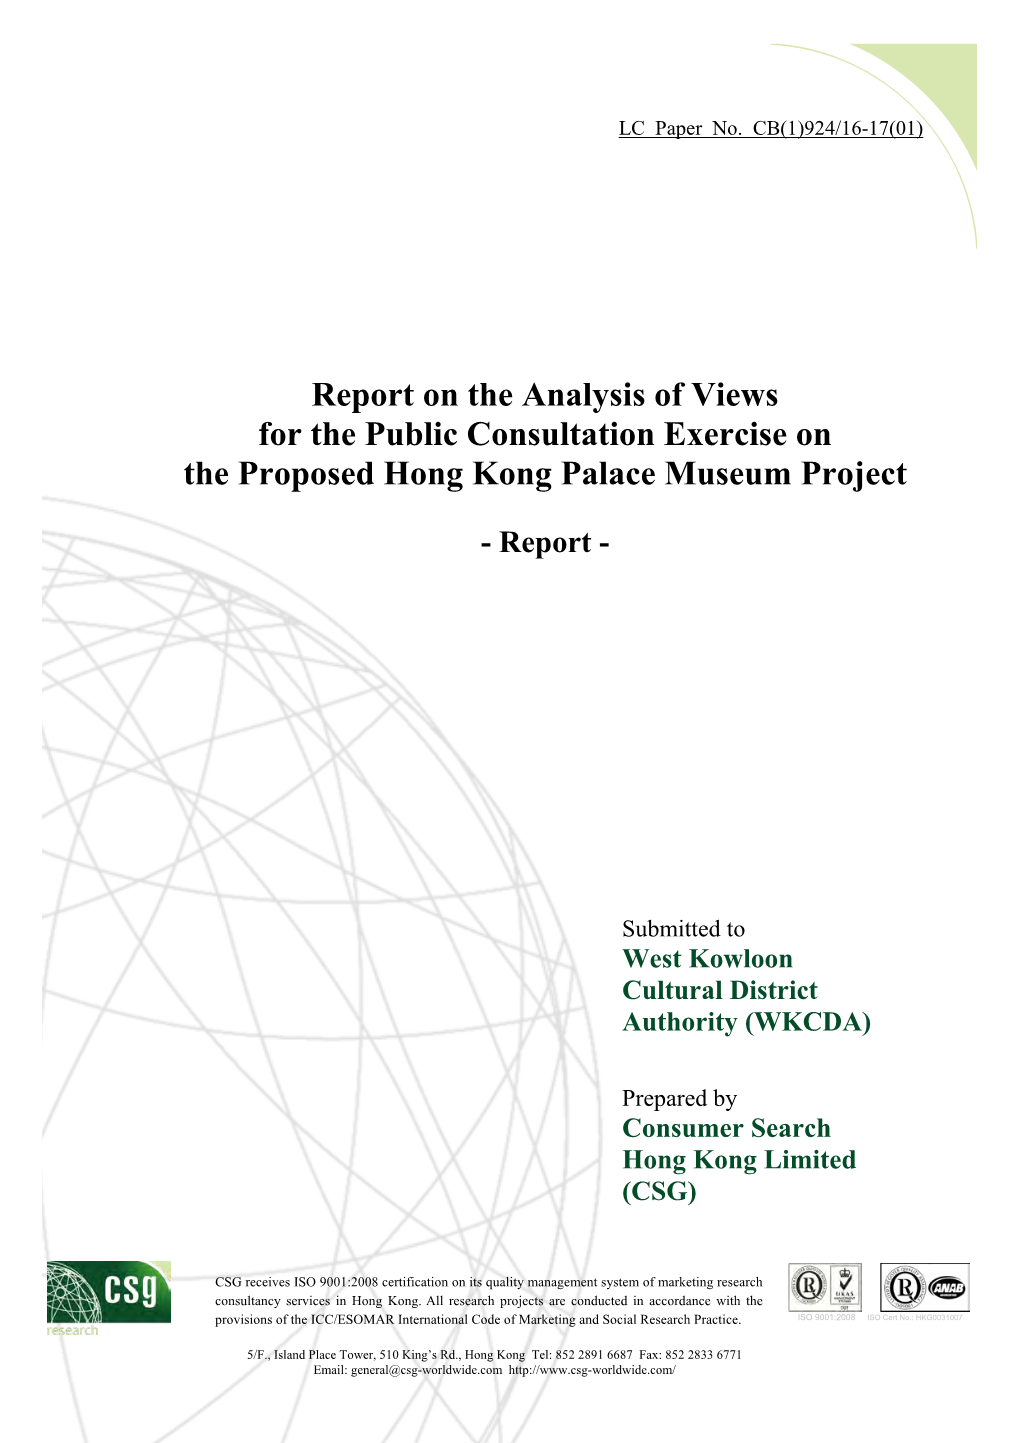 Report on the Analysis of Views for the Public Consultation Exercise on the Proposed Hong Kong Palace Museum Project